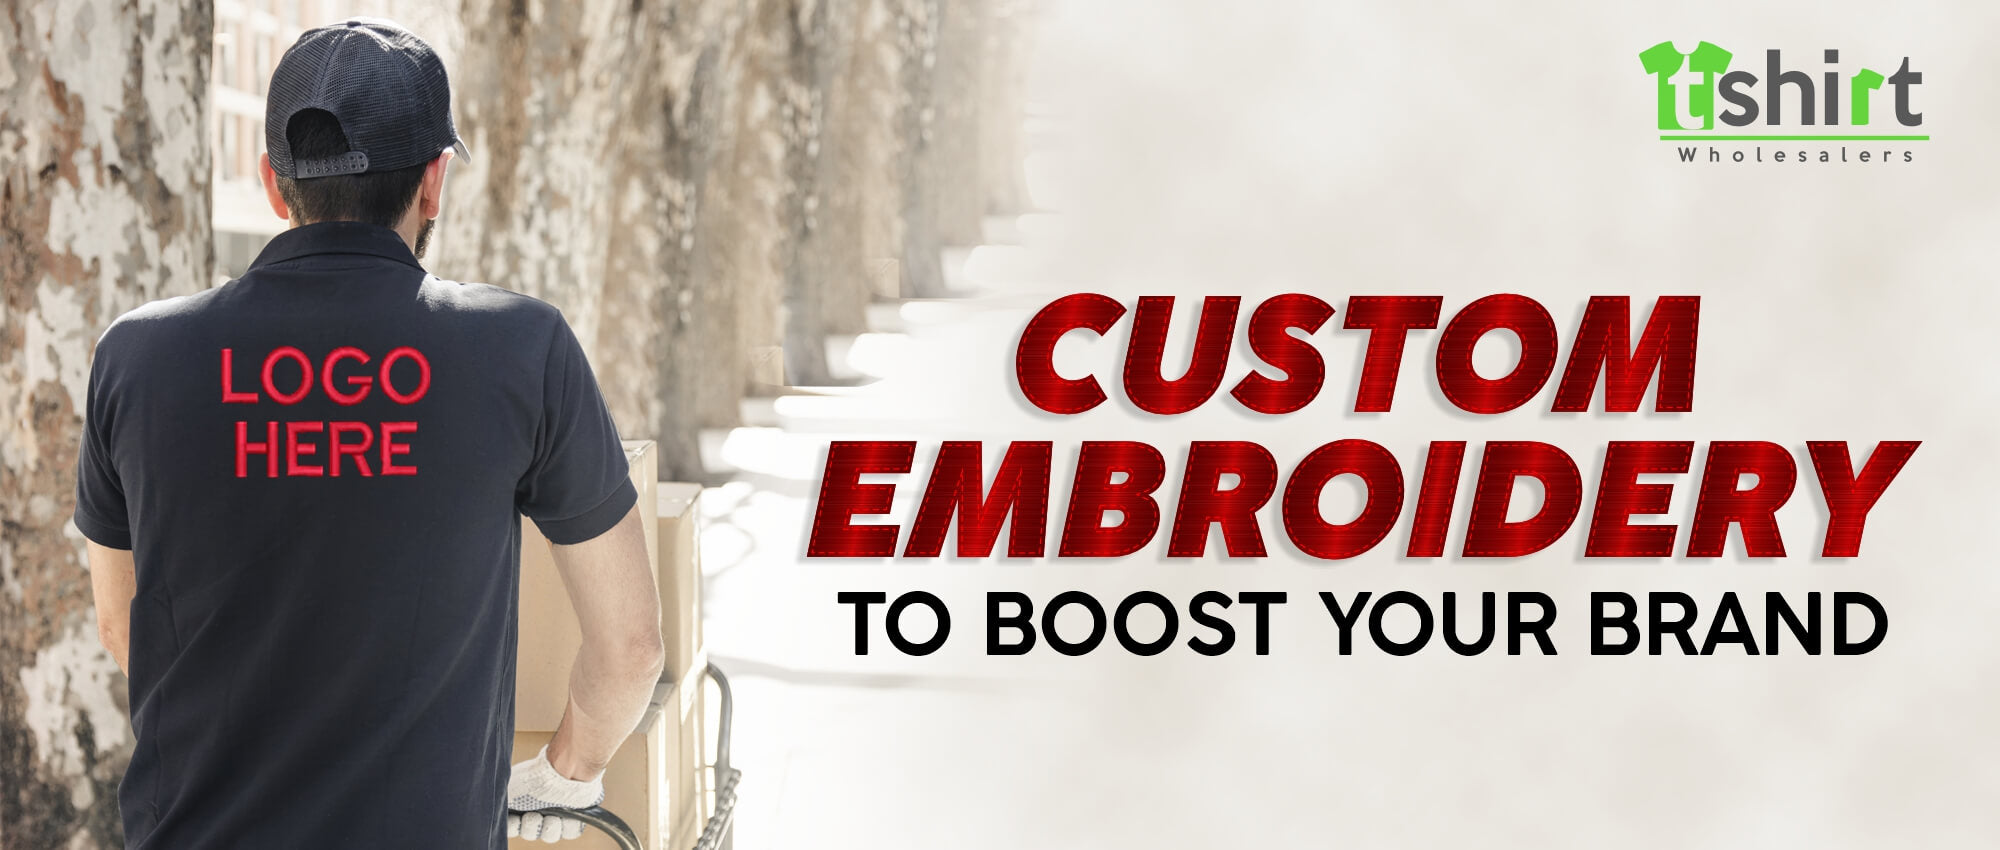 CUSTOM EMBROIDERY TO BOOST YOUR BRAND